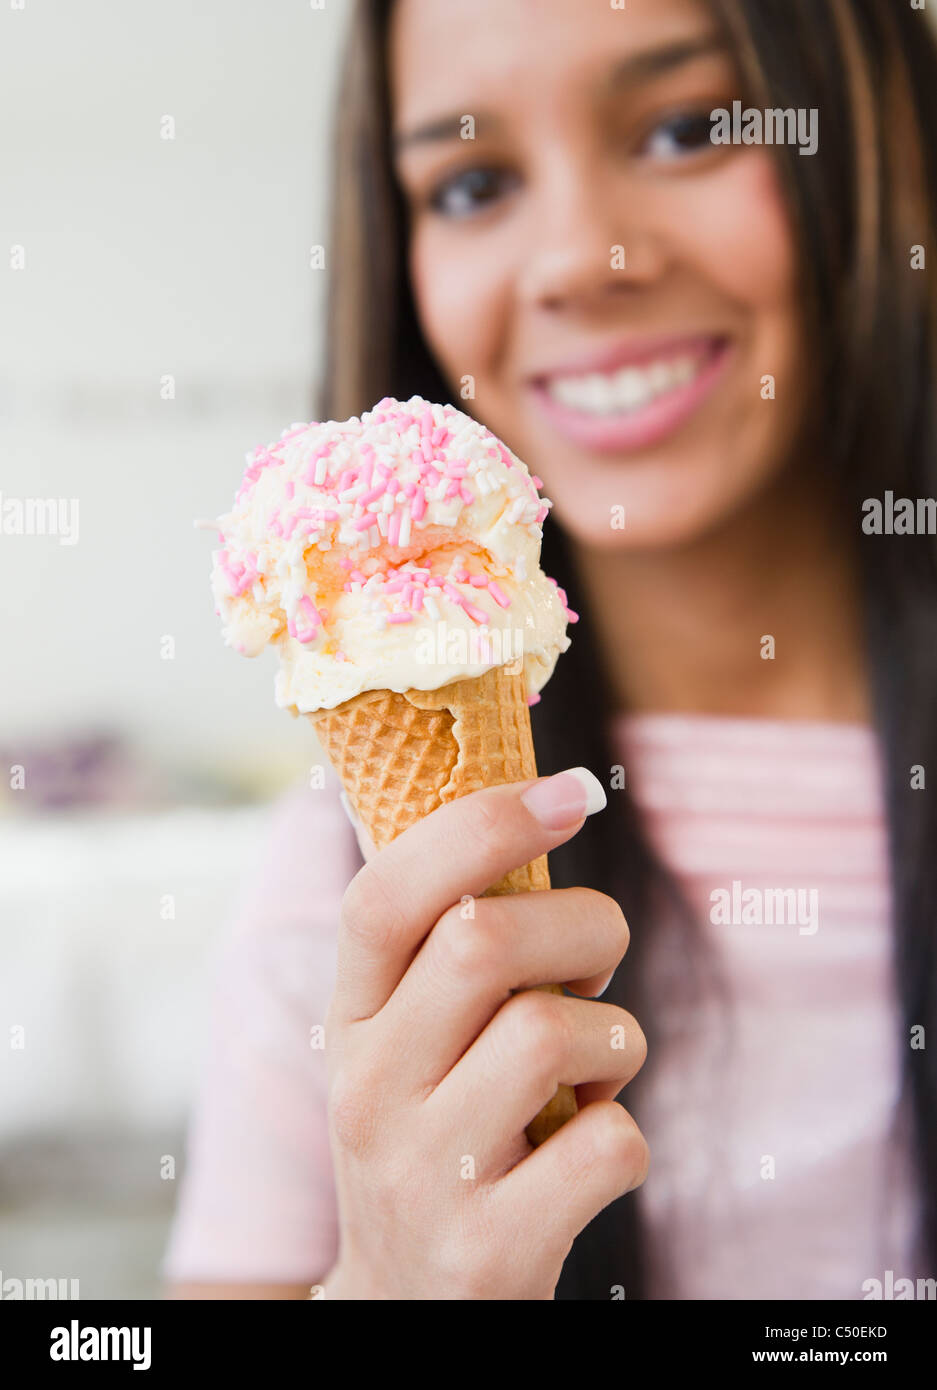 Hispanic teenager eating ice cream cone Banque D'Images